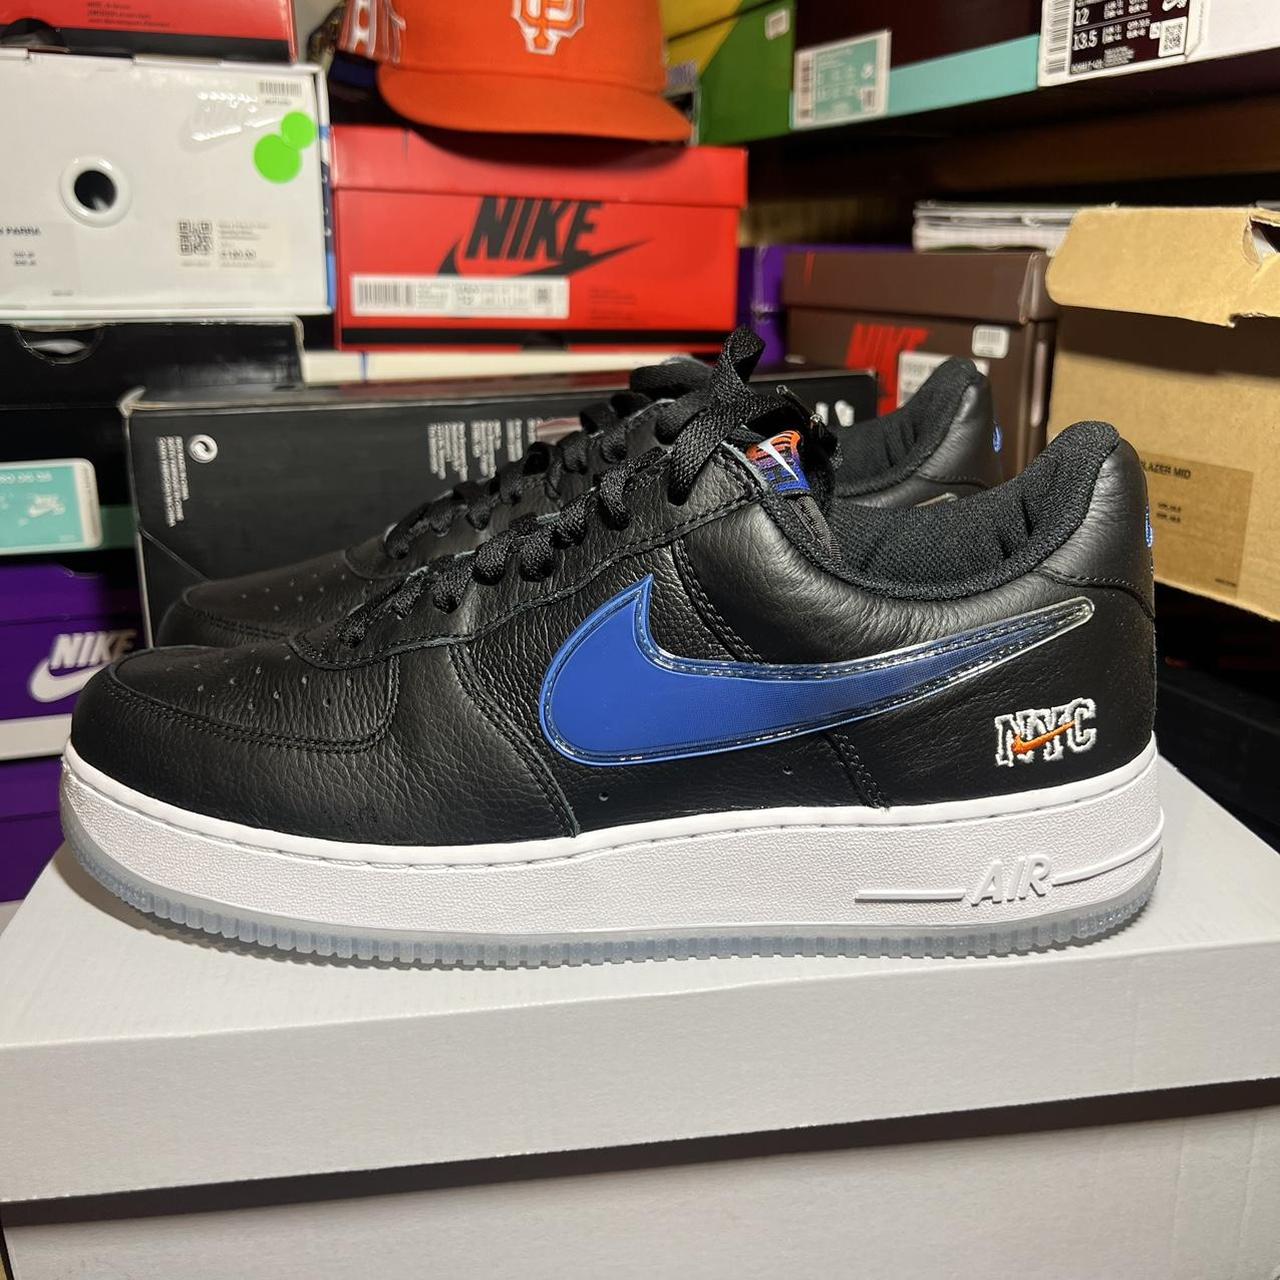 Nike Air Force 1 Low Kith NYC Sneaker